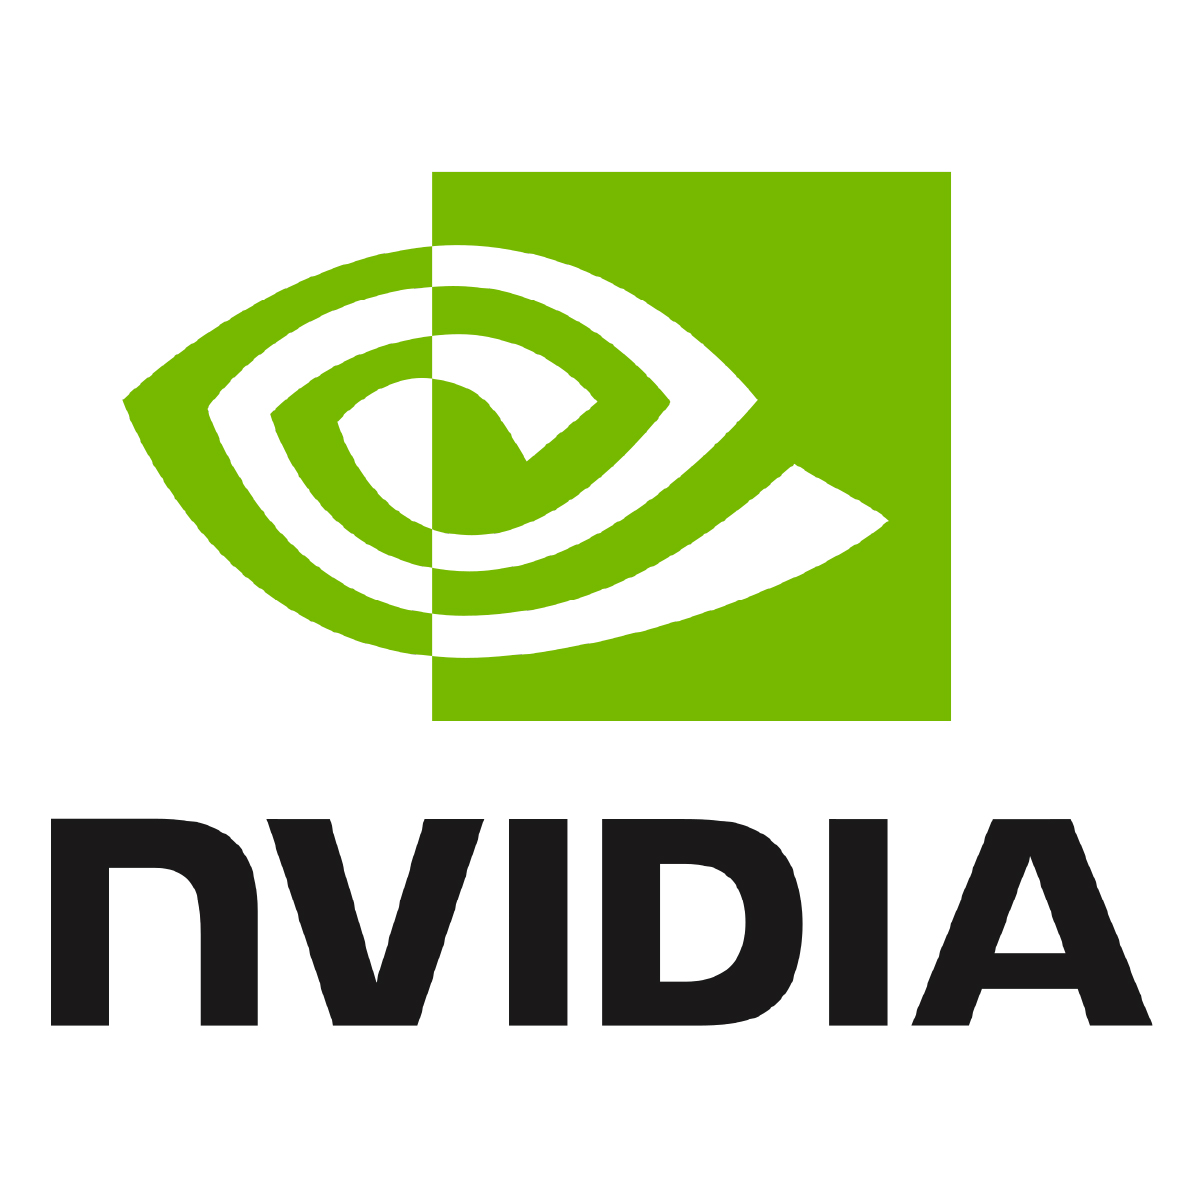 System Software Engineer - HPC Performance - NVIDIA 1 System Software Engineer - HPC Performance - NVIDIA